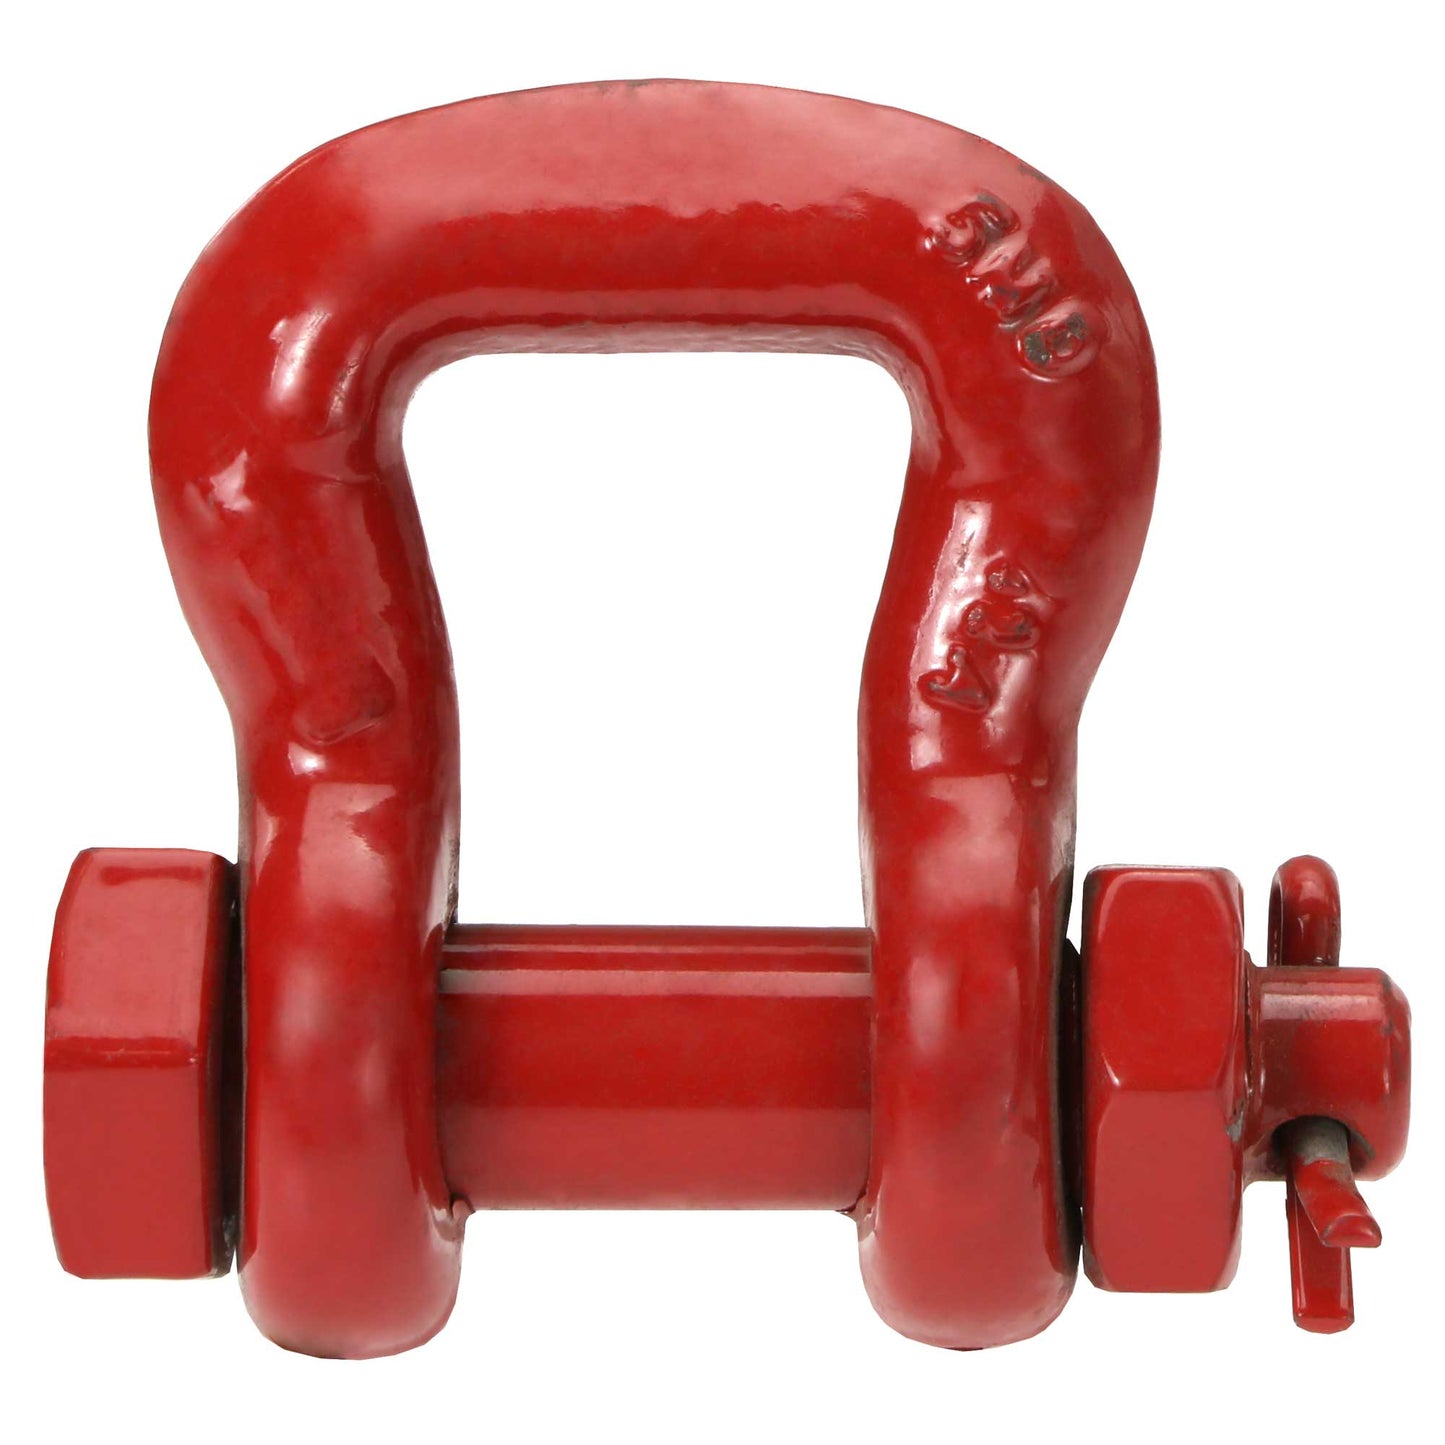 Crosby® Bolt Type Sling Saver Shackle | S-252 - 6"- 50 Ton primary image